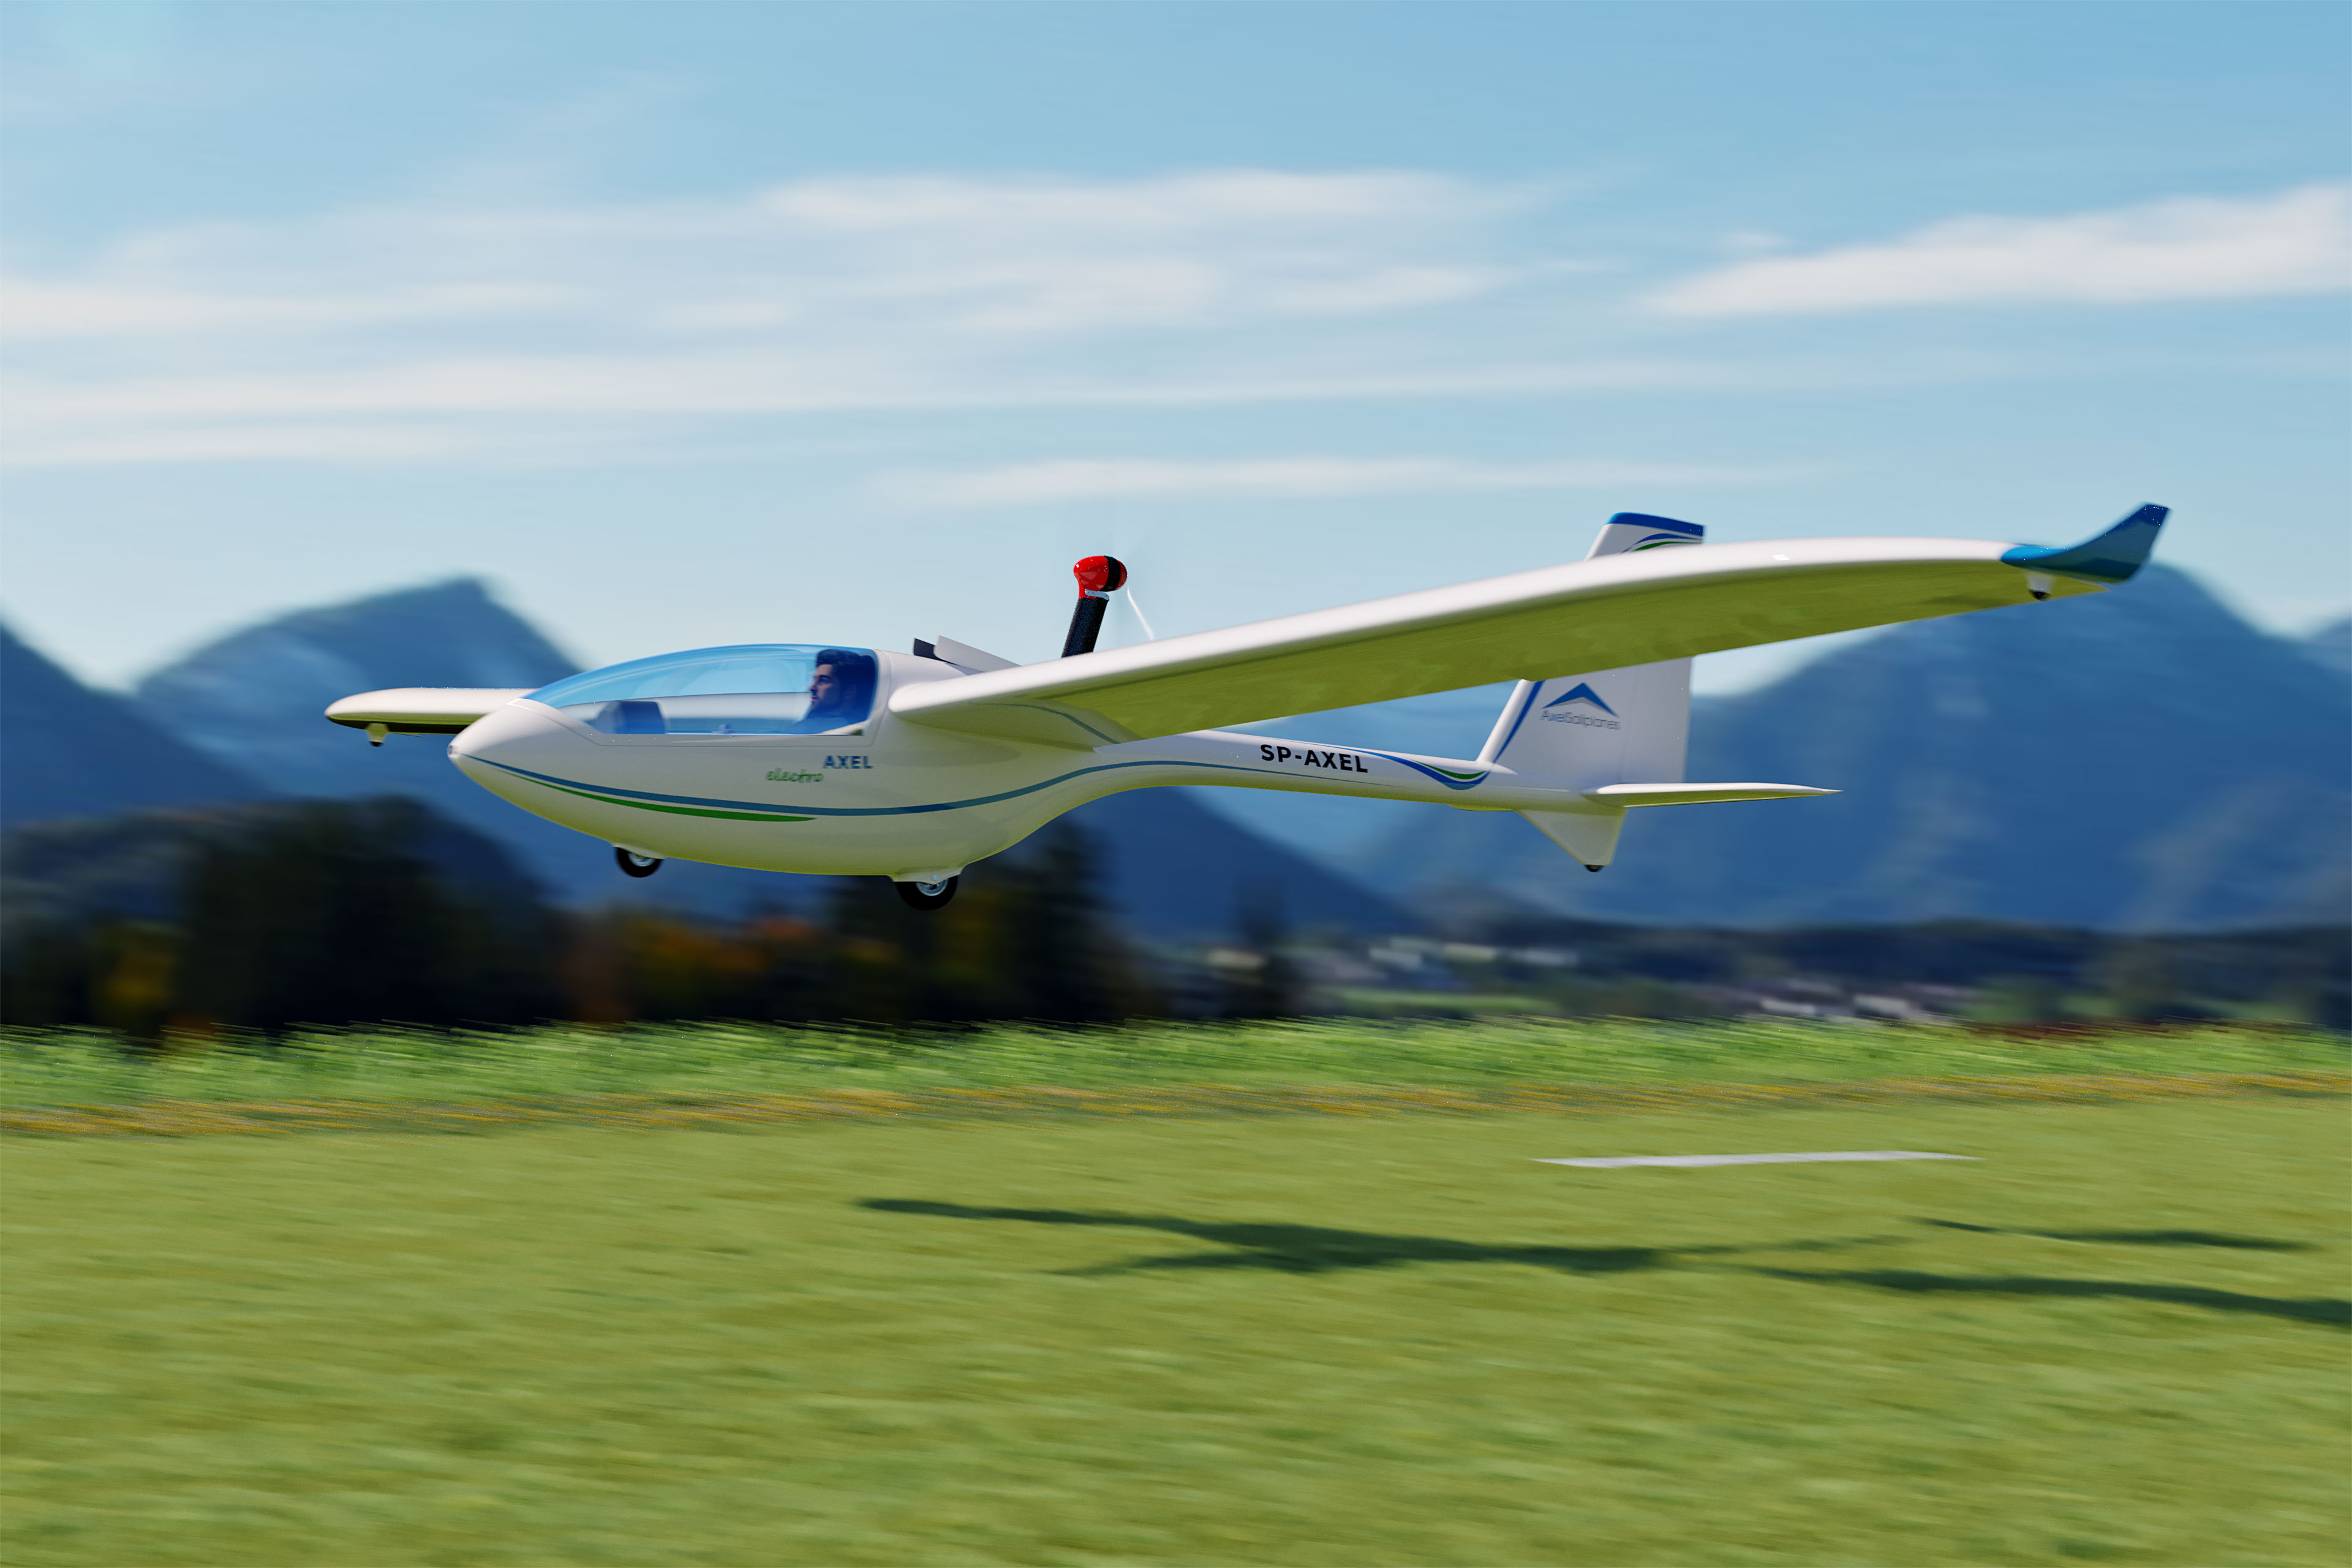 3D rendering visualization of the taking off Axel glider